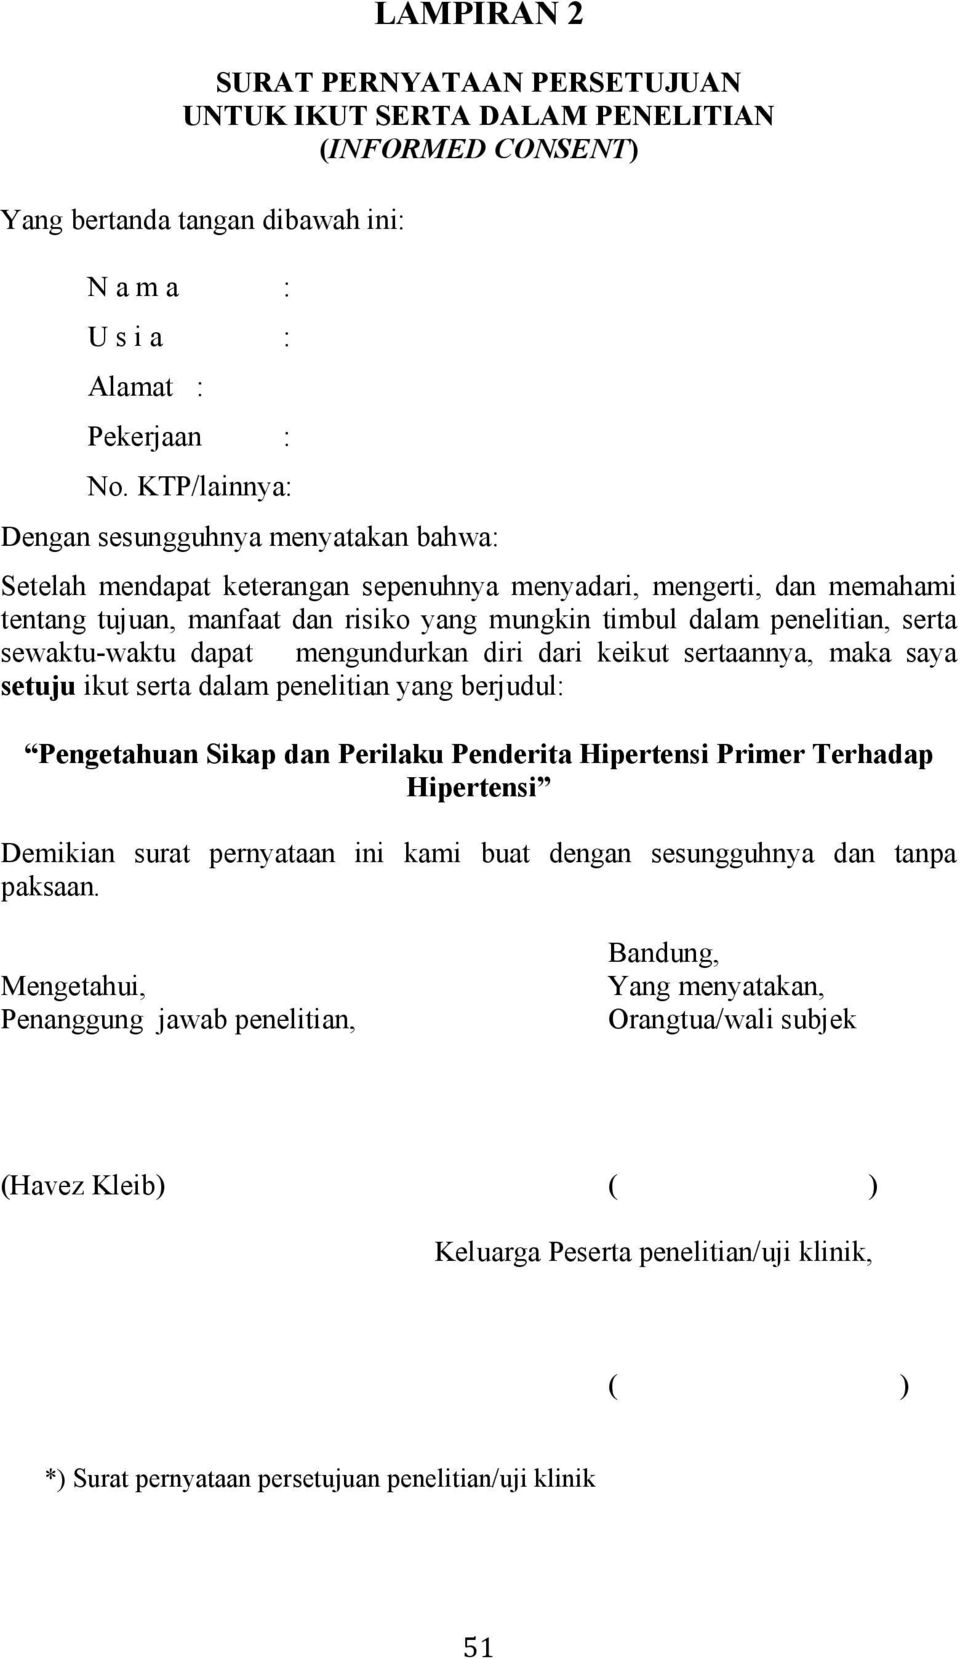 Detail Informed Consent Contoh Nomer 35